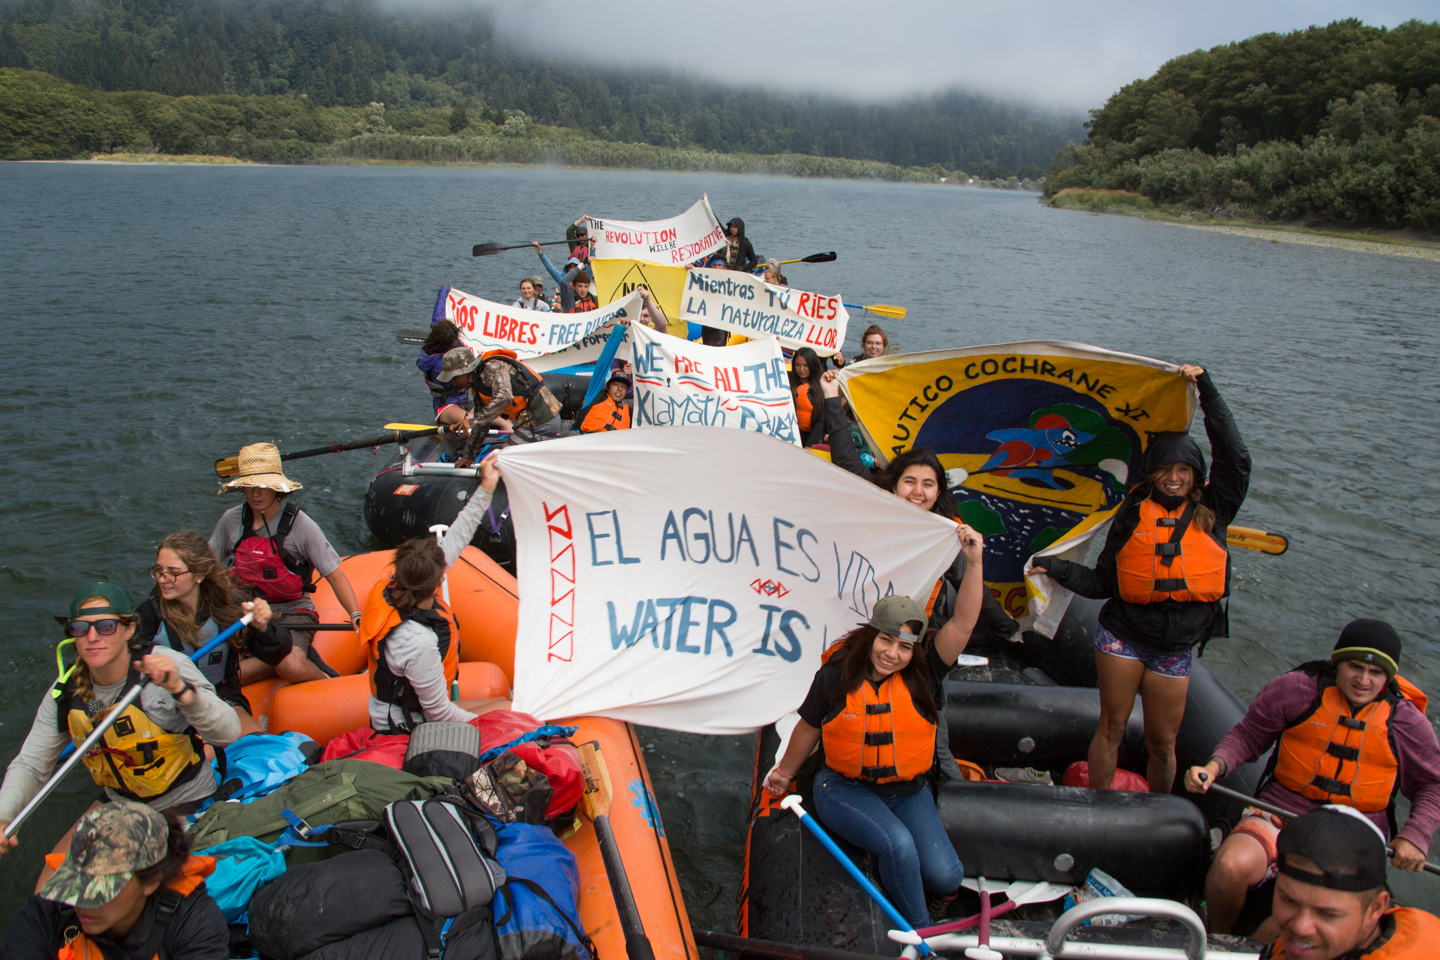 A group of people on rafts hold up signs protesting a dam